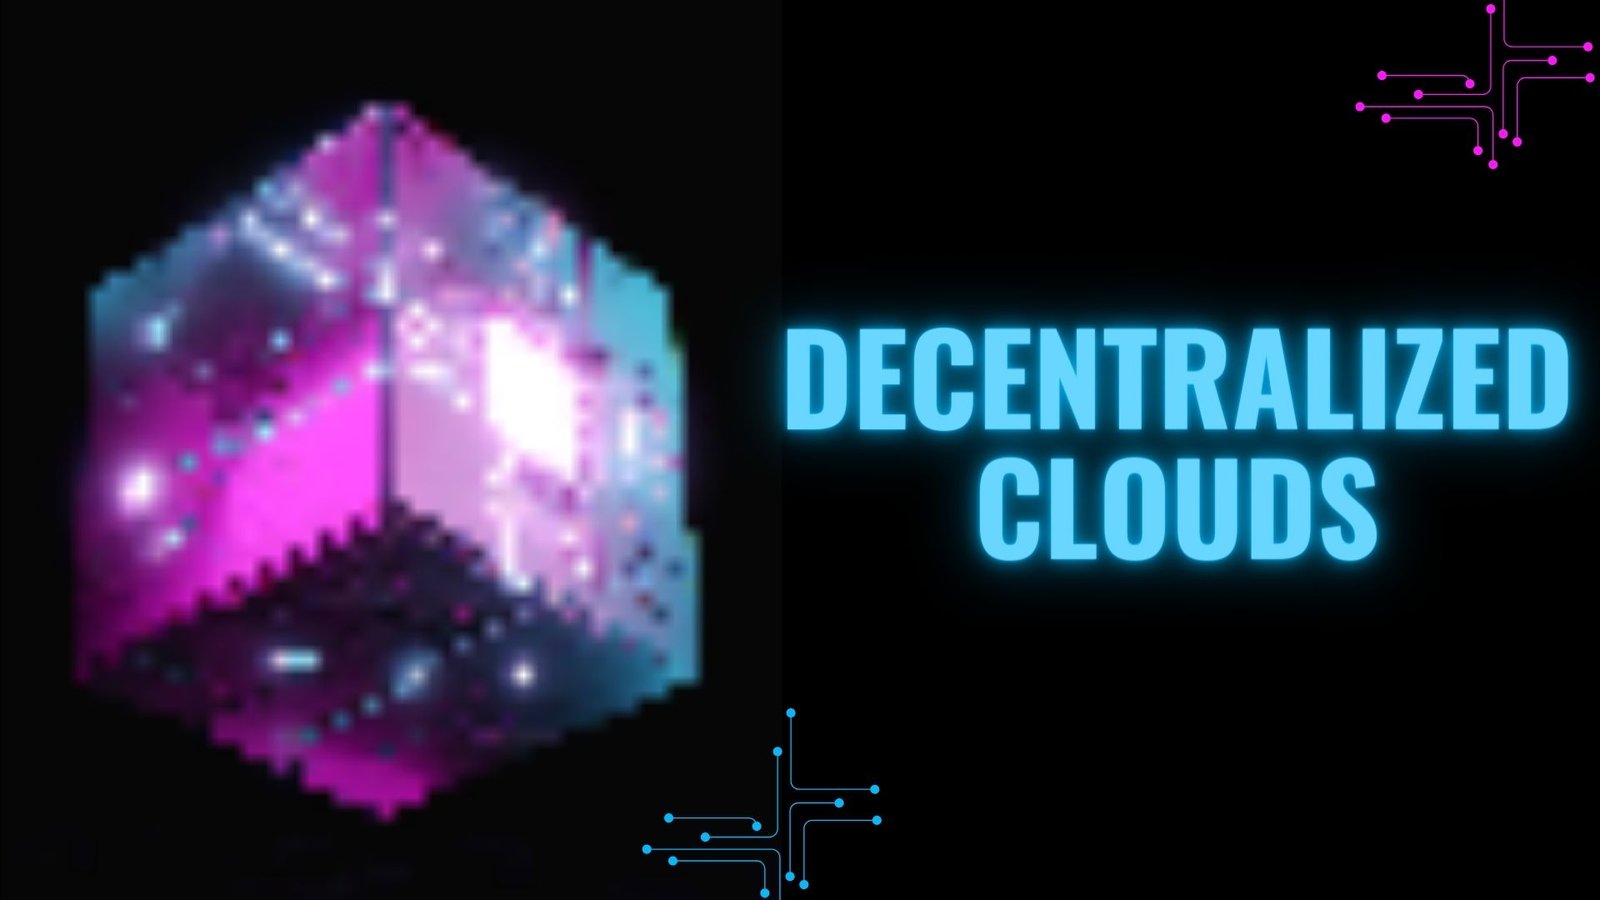 Decentralized Clouds: An Alternative to Mainstream Services